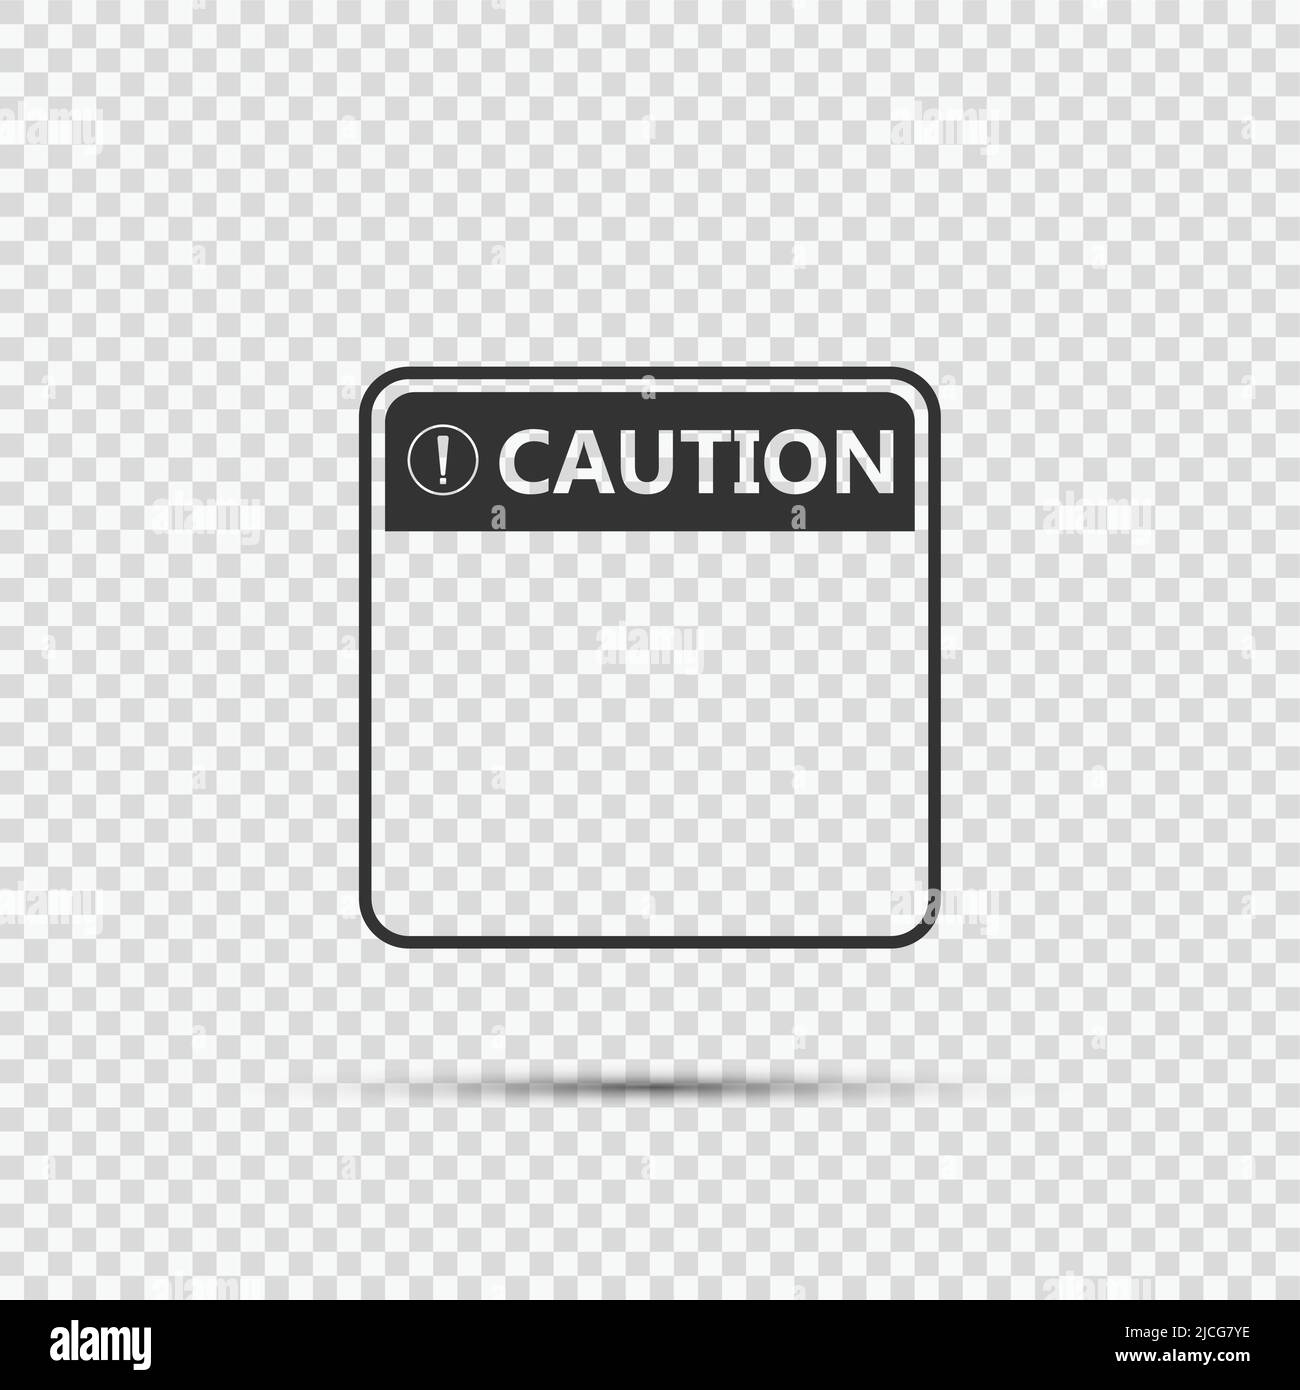 symbol yellow caution sign icon,Exclamation mark ,Warning Dangerous icon on transparent background,vector illustration Stock Vector